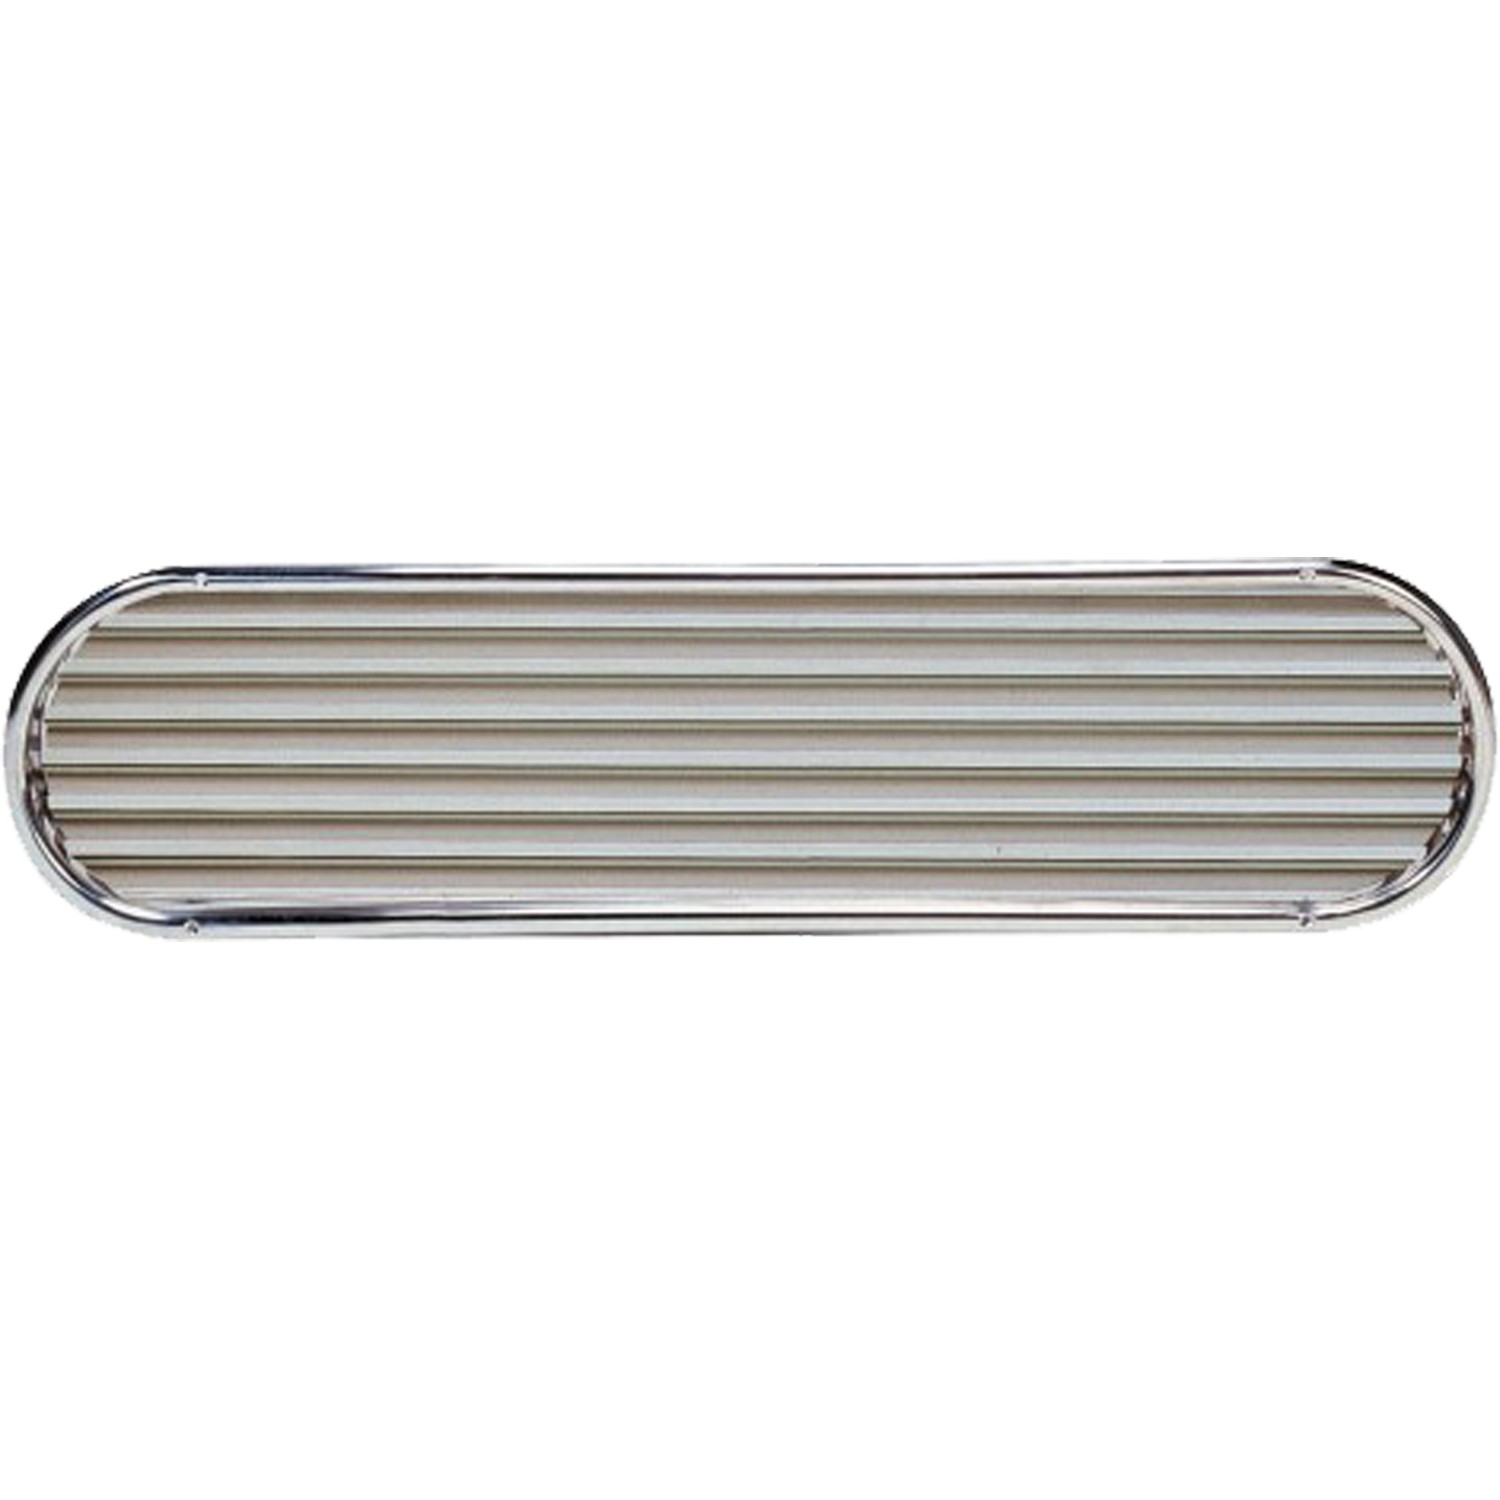 Sidewall and Ceiling Mount KESOTO 2x Stainless Steel Boat Air Vent Ventilation Grill Cover for Marine Boats Companionway Door and Cabin 